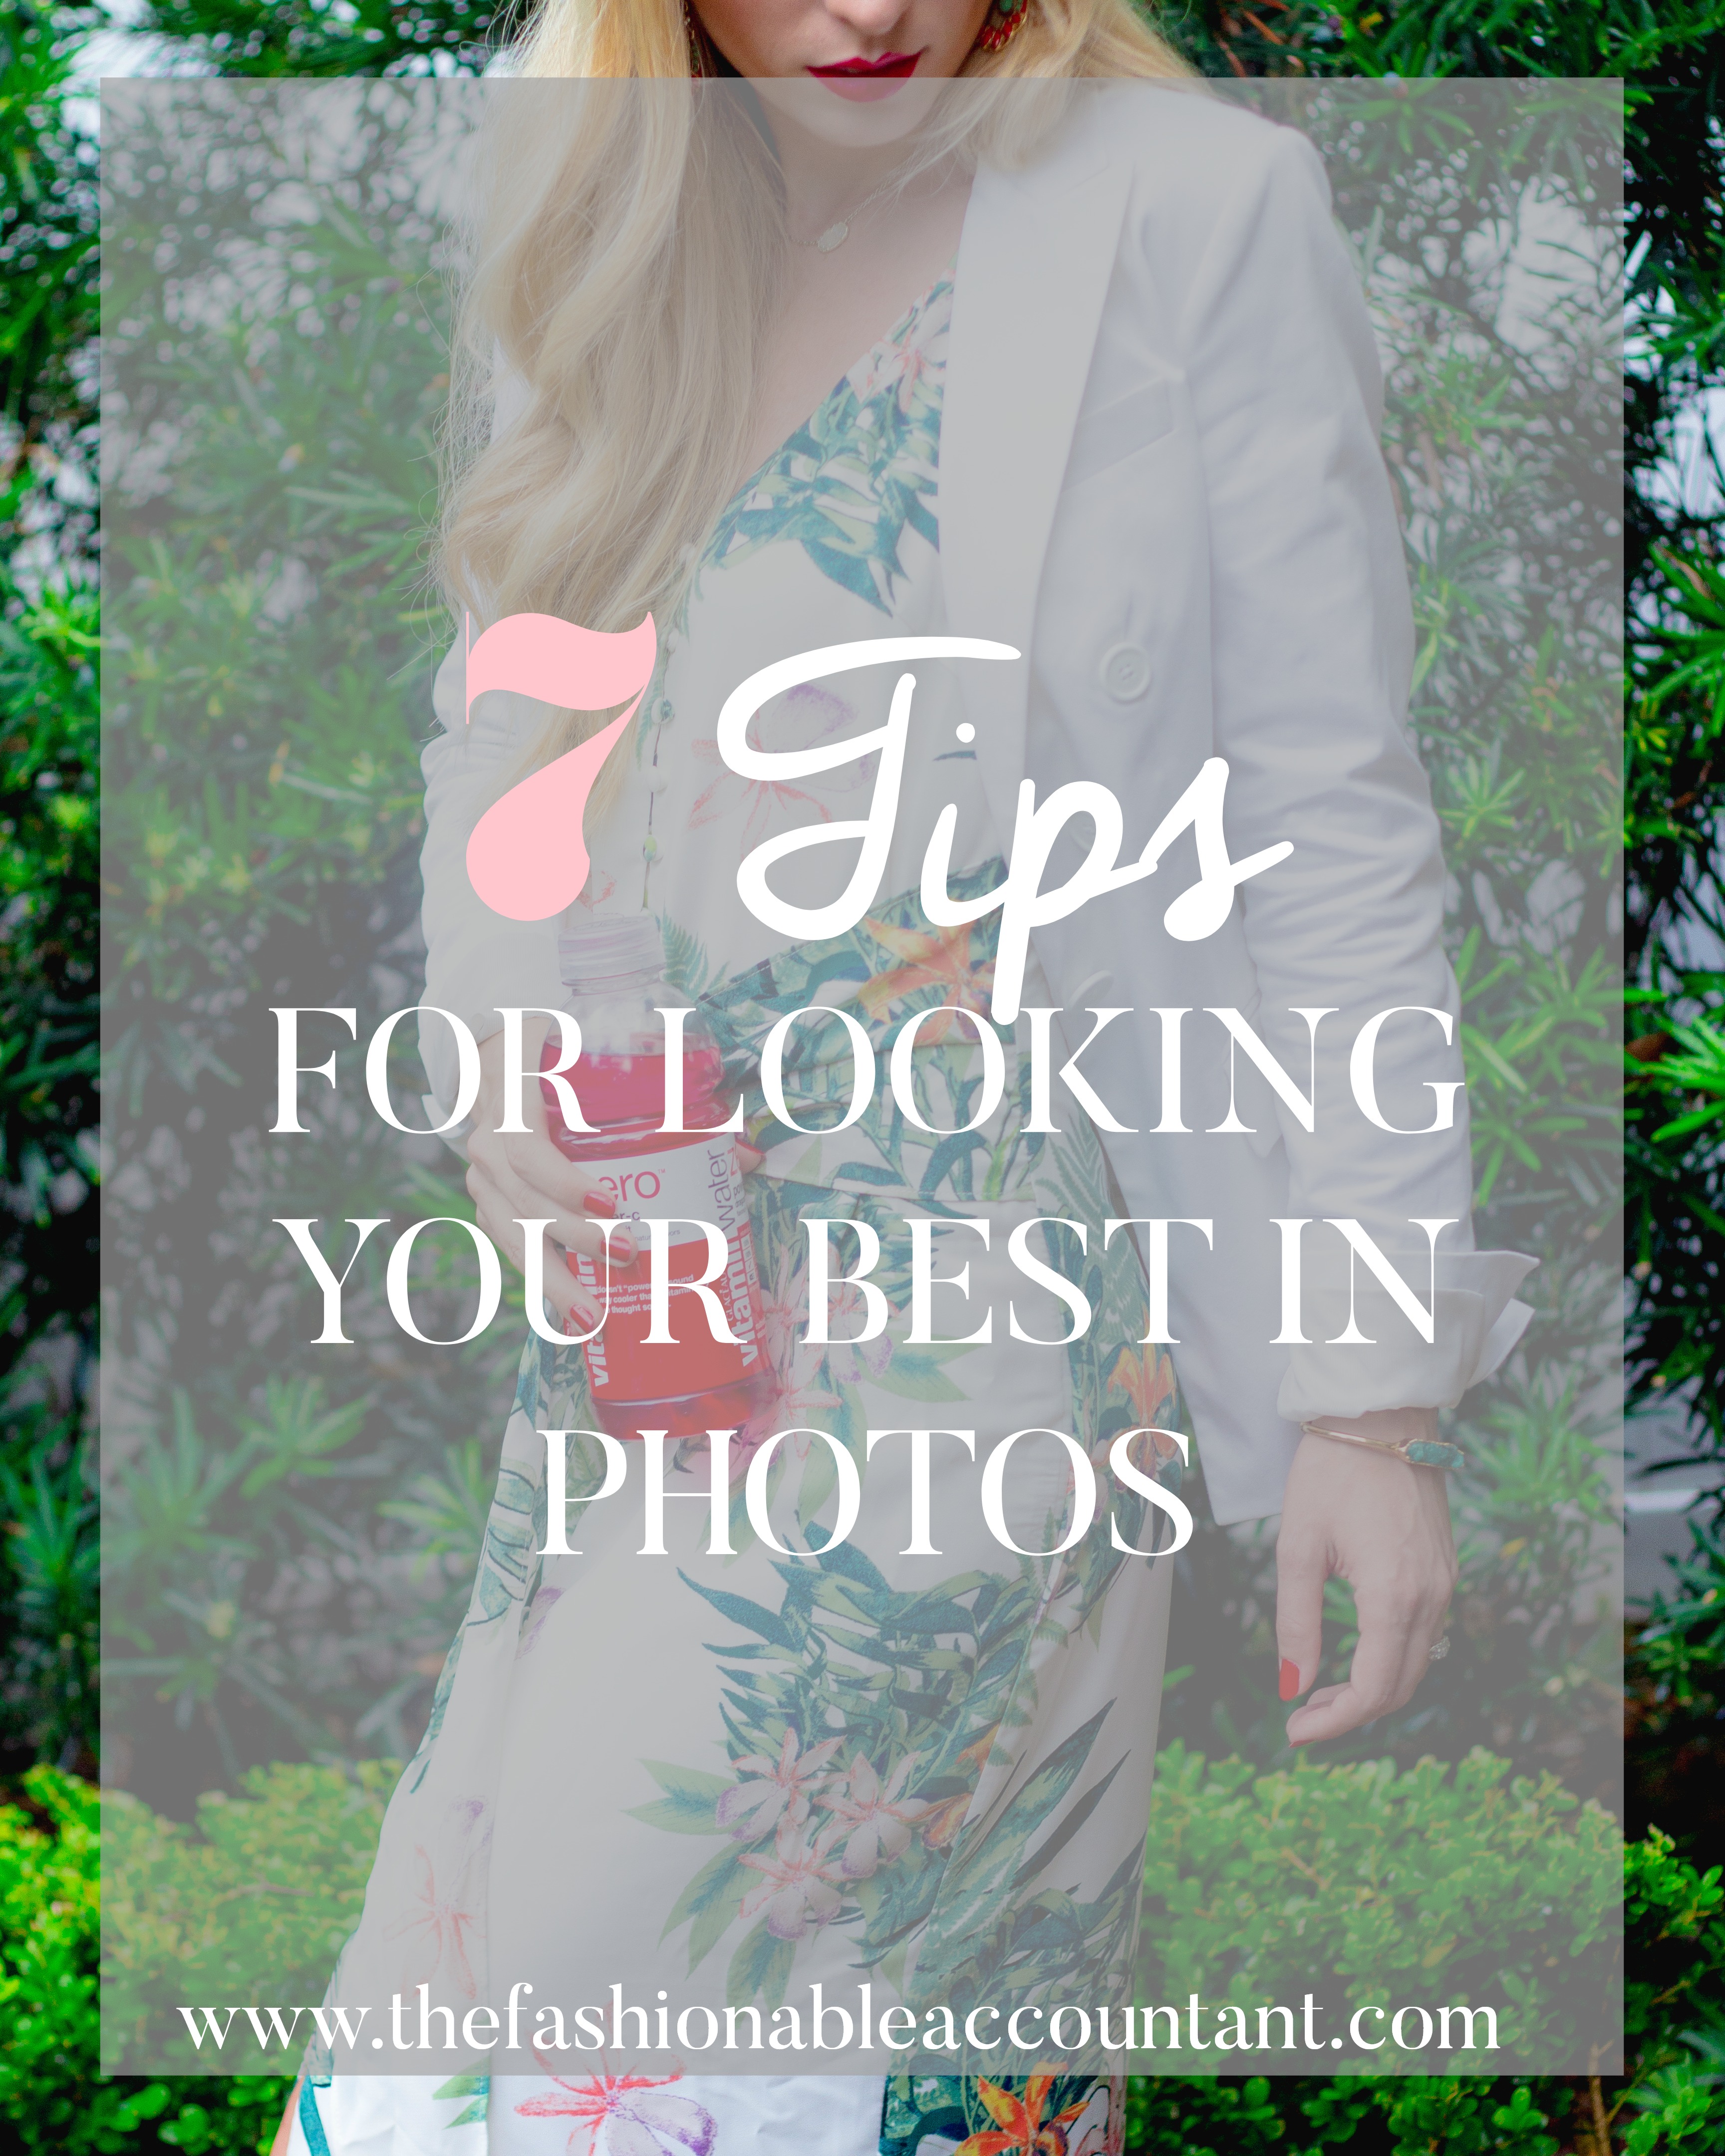 7 TIPS FOR LOOKING YOUR BEST IN PHOTOS